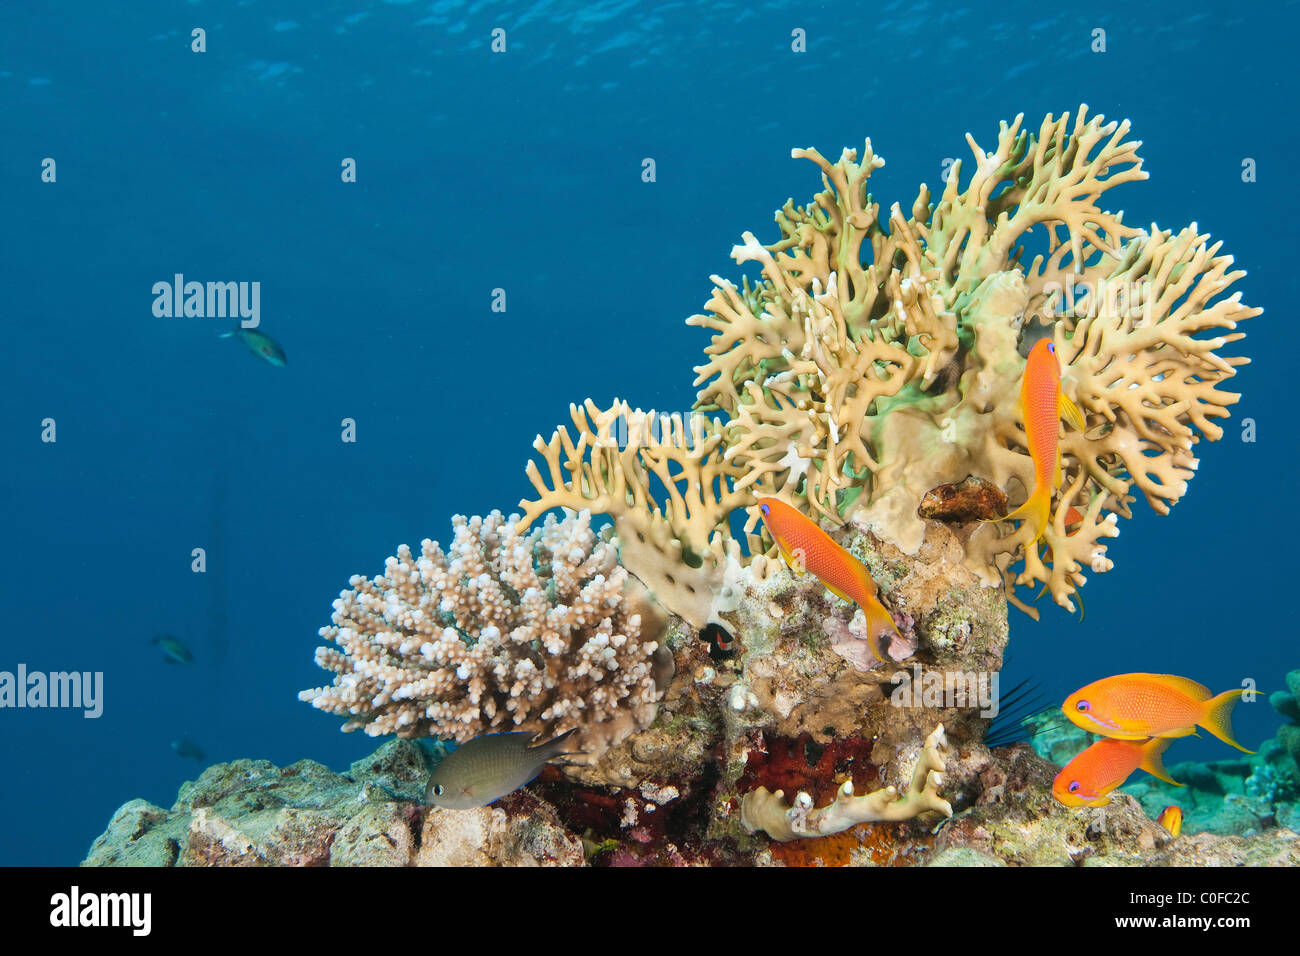 Under water photography of a coral reef eco system Photographed in the Red Sea Israel Stock Photo